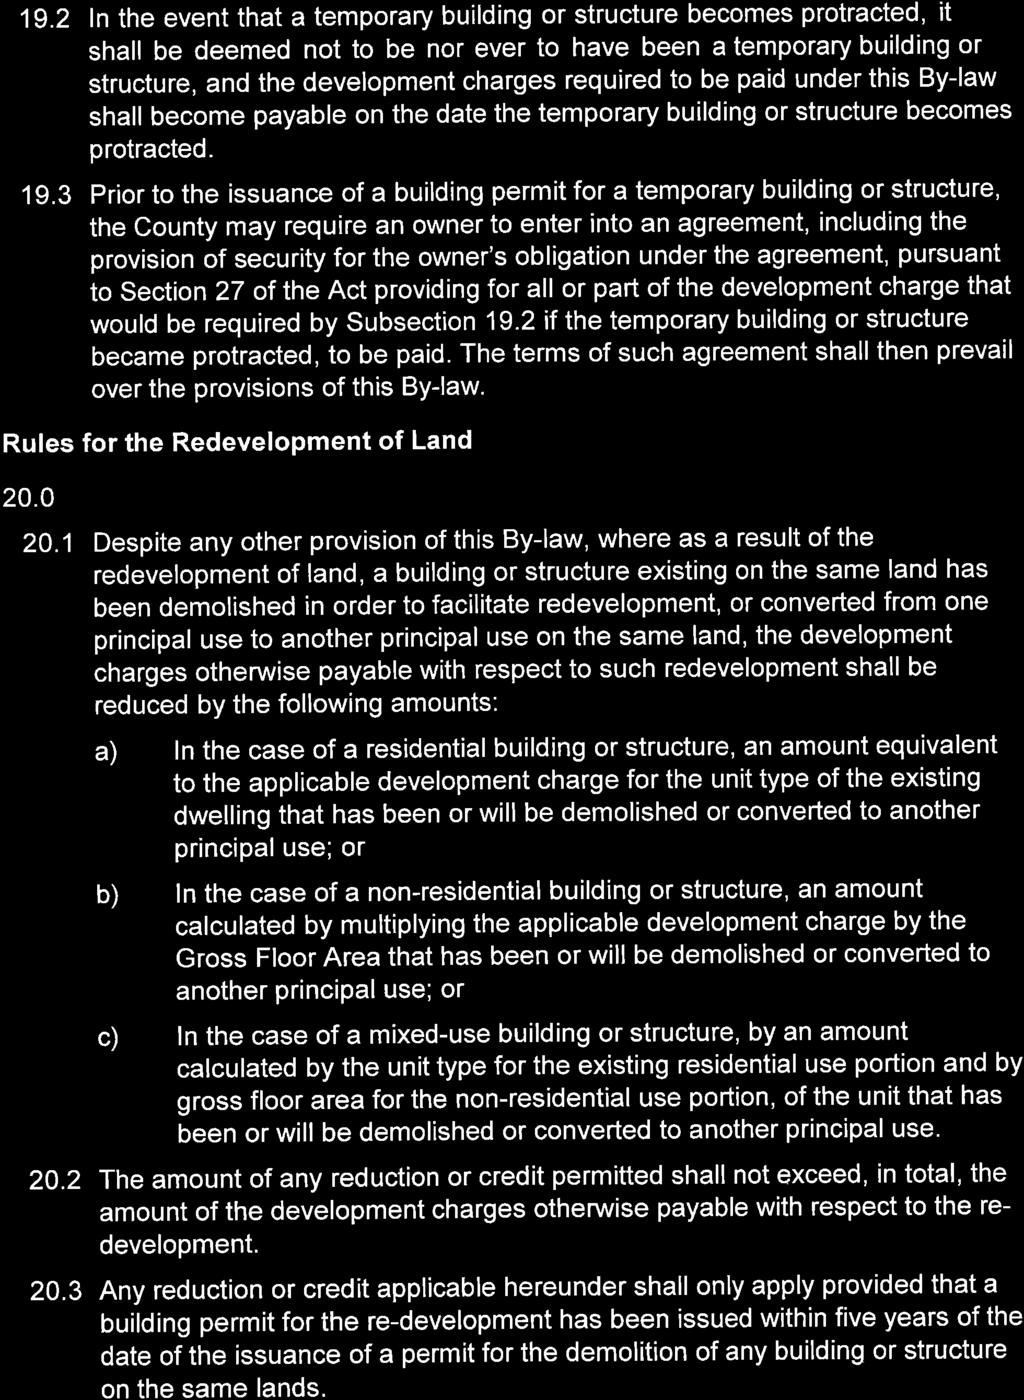 19.2 ln the event that a temporary building or structure becomes protracted, it shall be deemed not to be nor ever to have been a temporary building or structure, and the development charges required